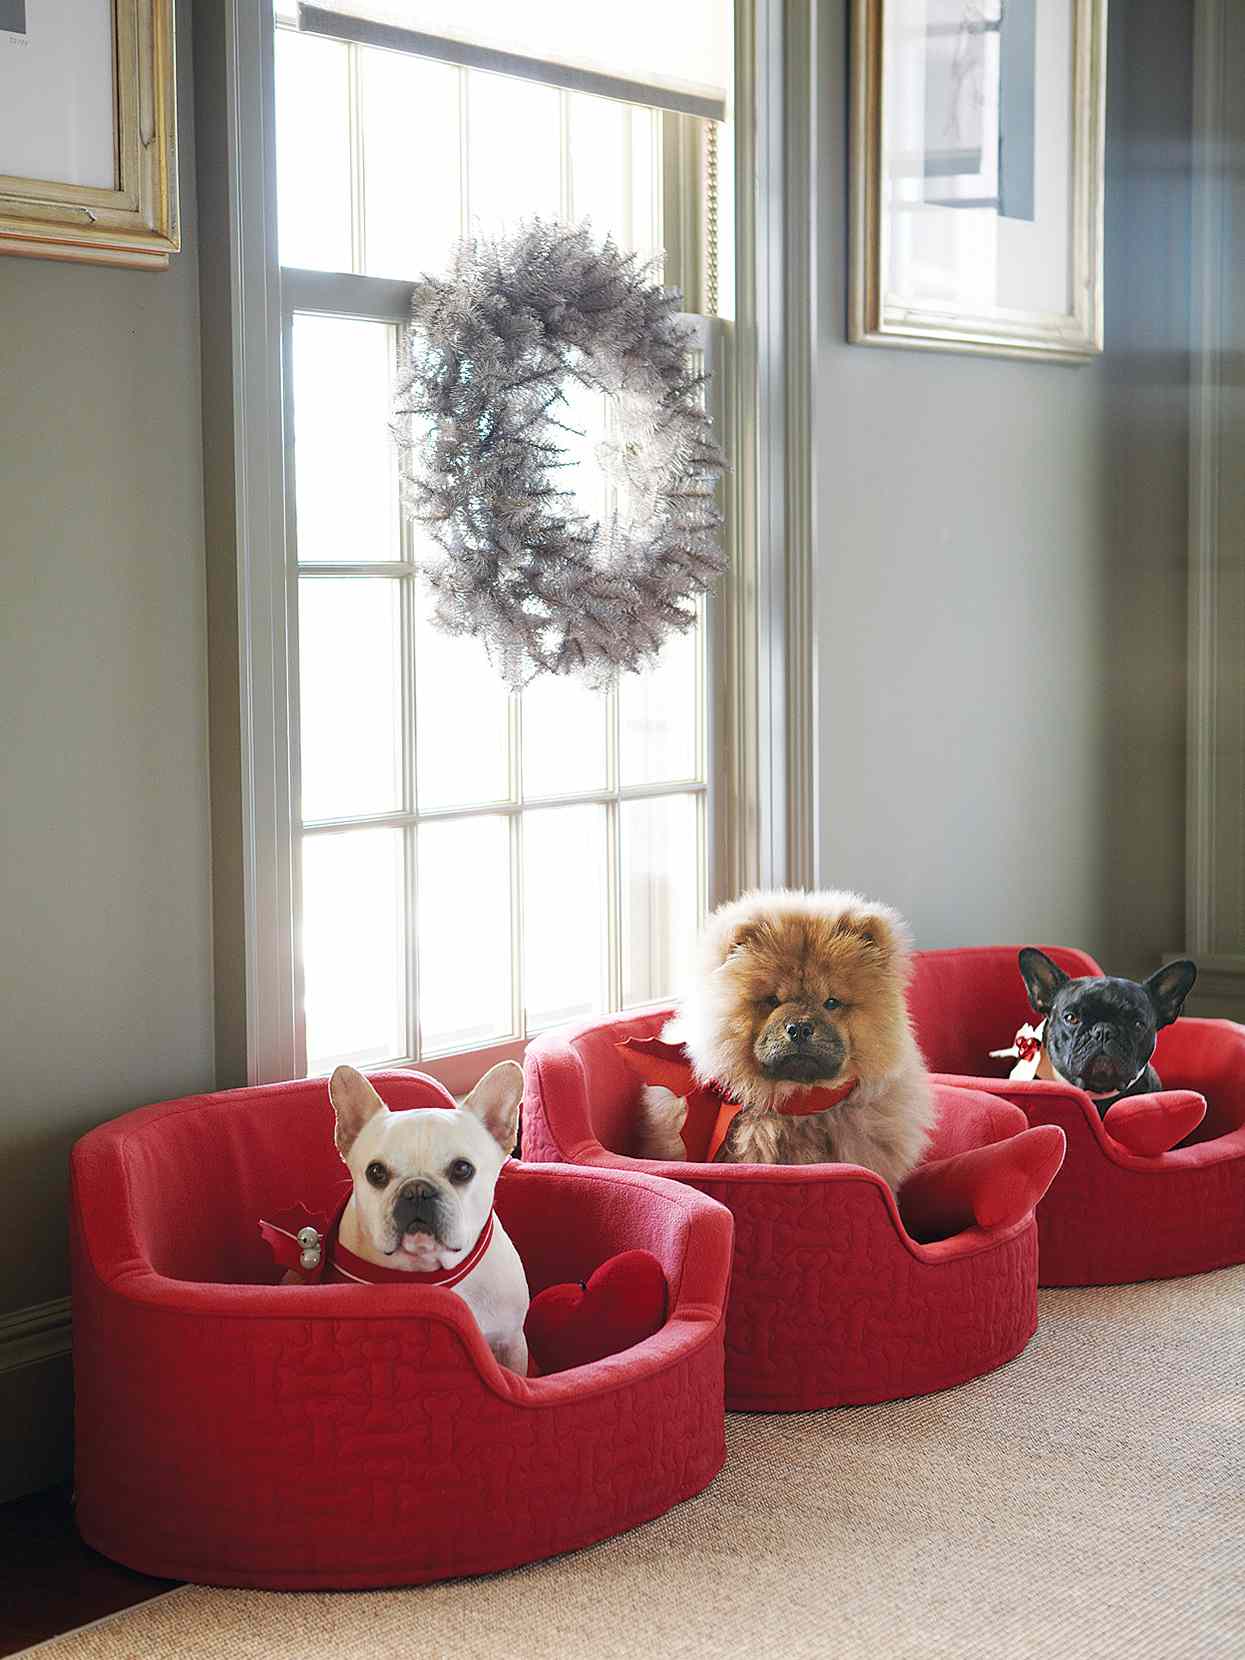 Martha's dogs on red chairs near window with wreath